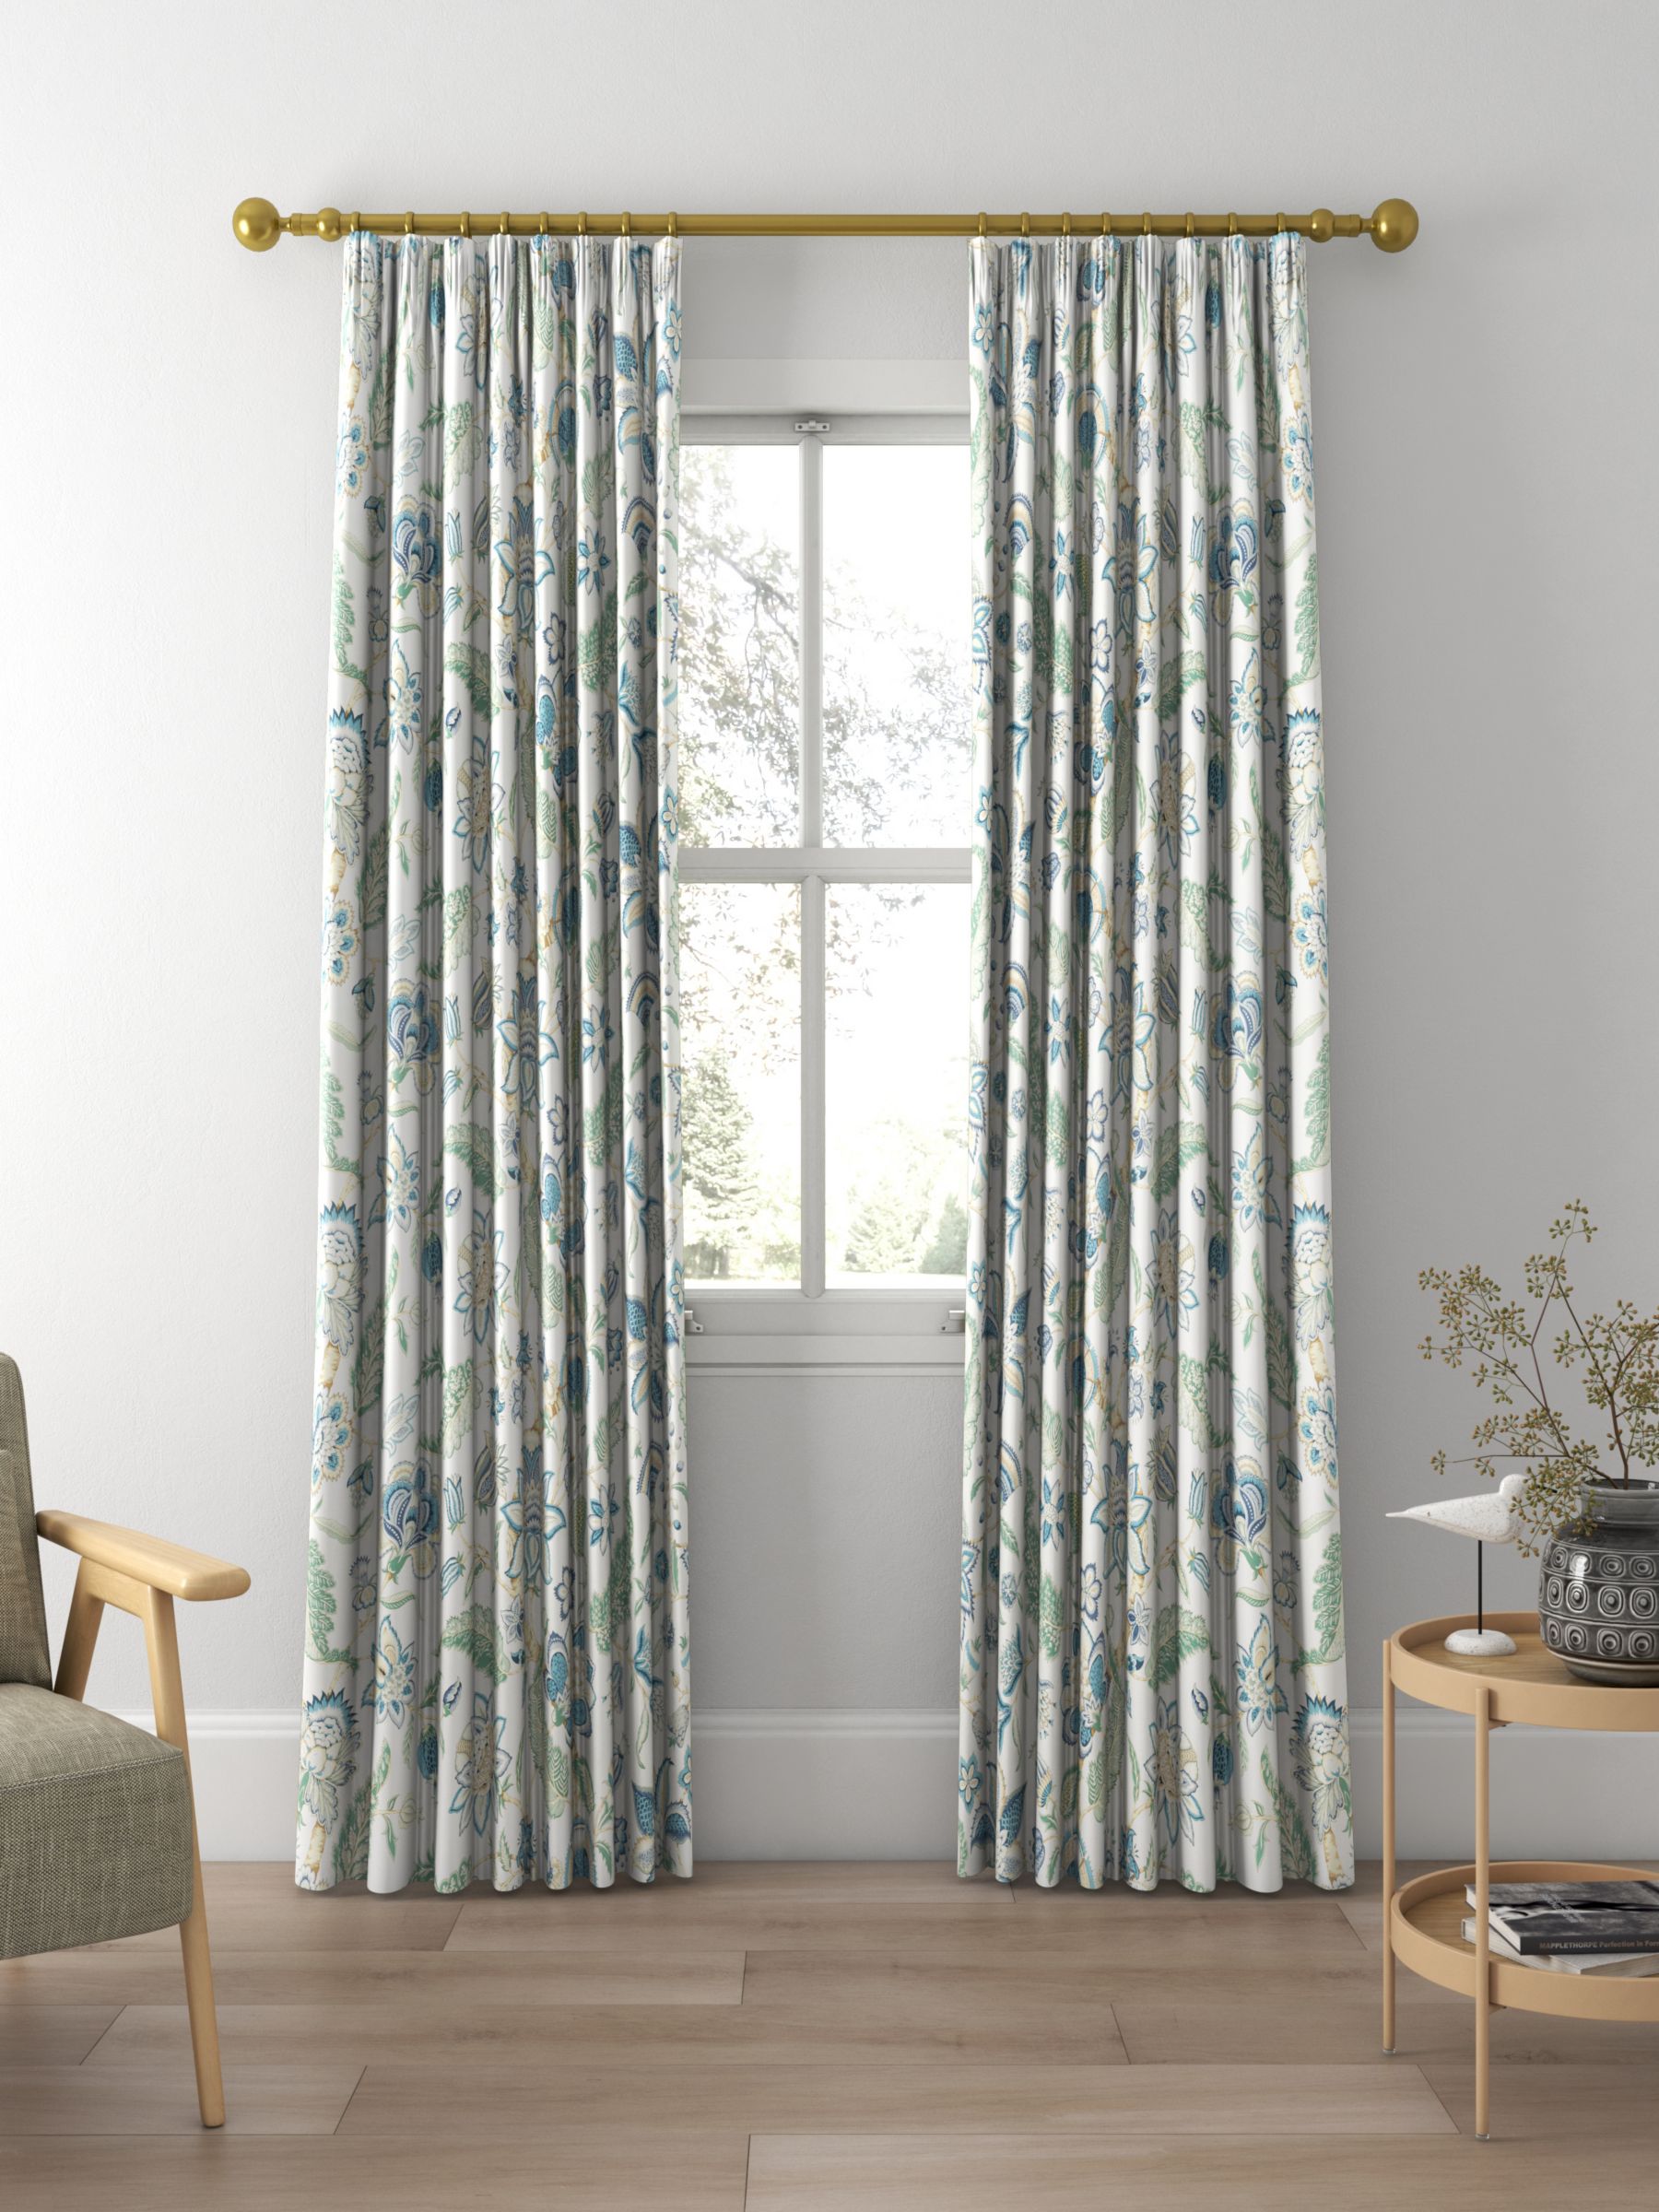 Sanderson Newnham Courtney Made to Measure Curtains or Roman Blind ...